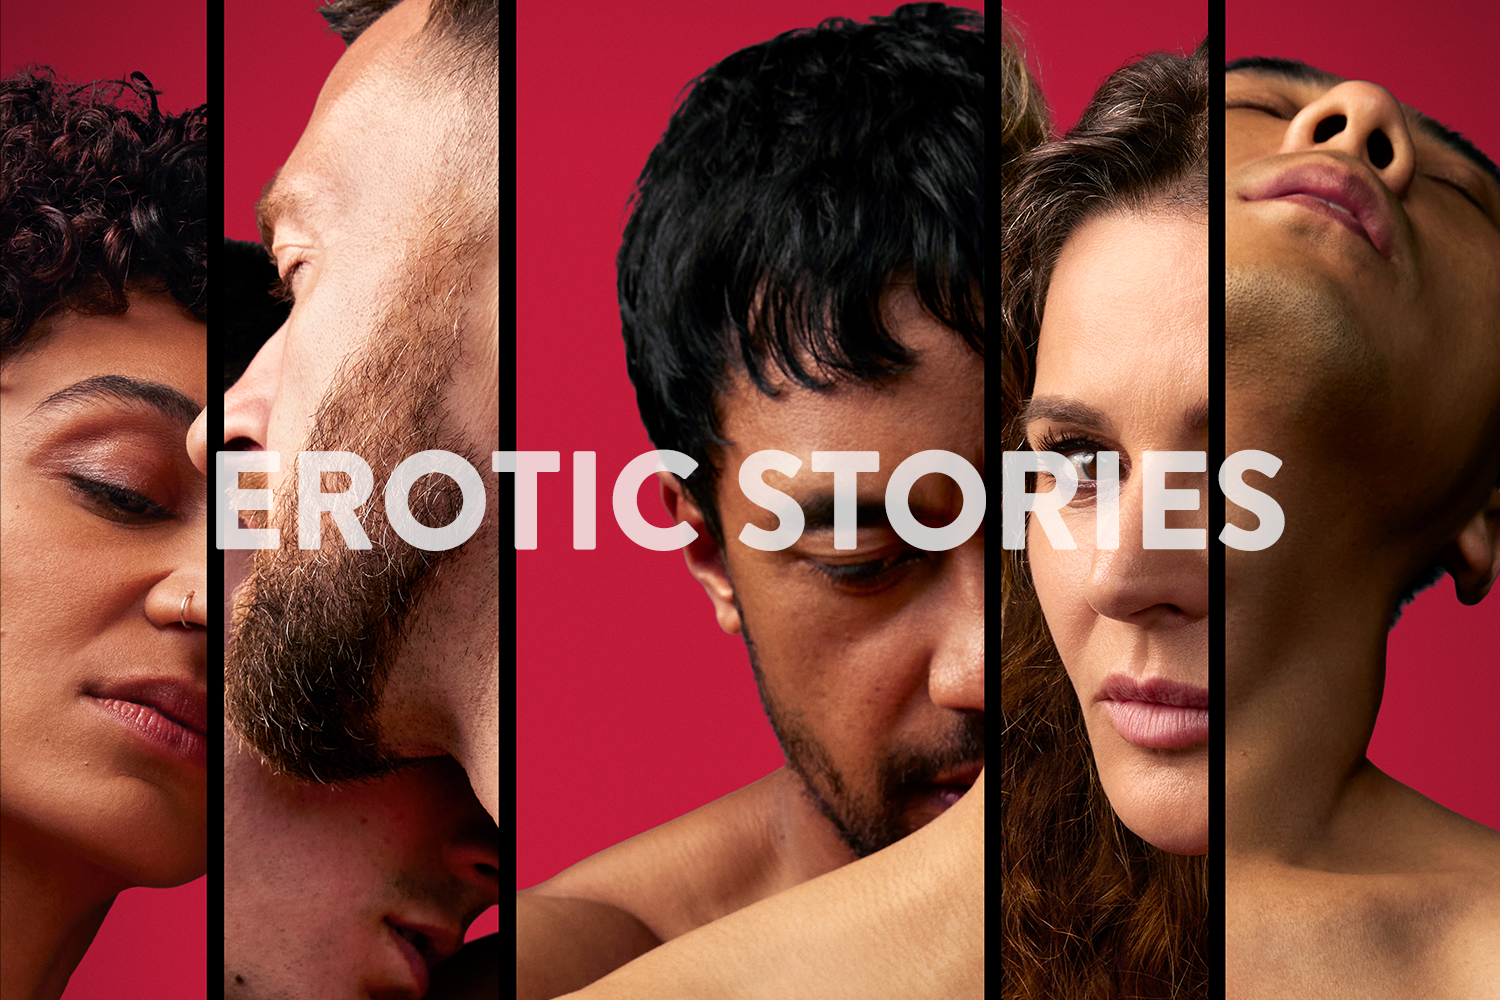 Erotic Stories_Project image.png